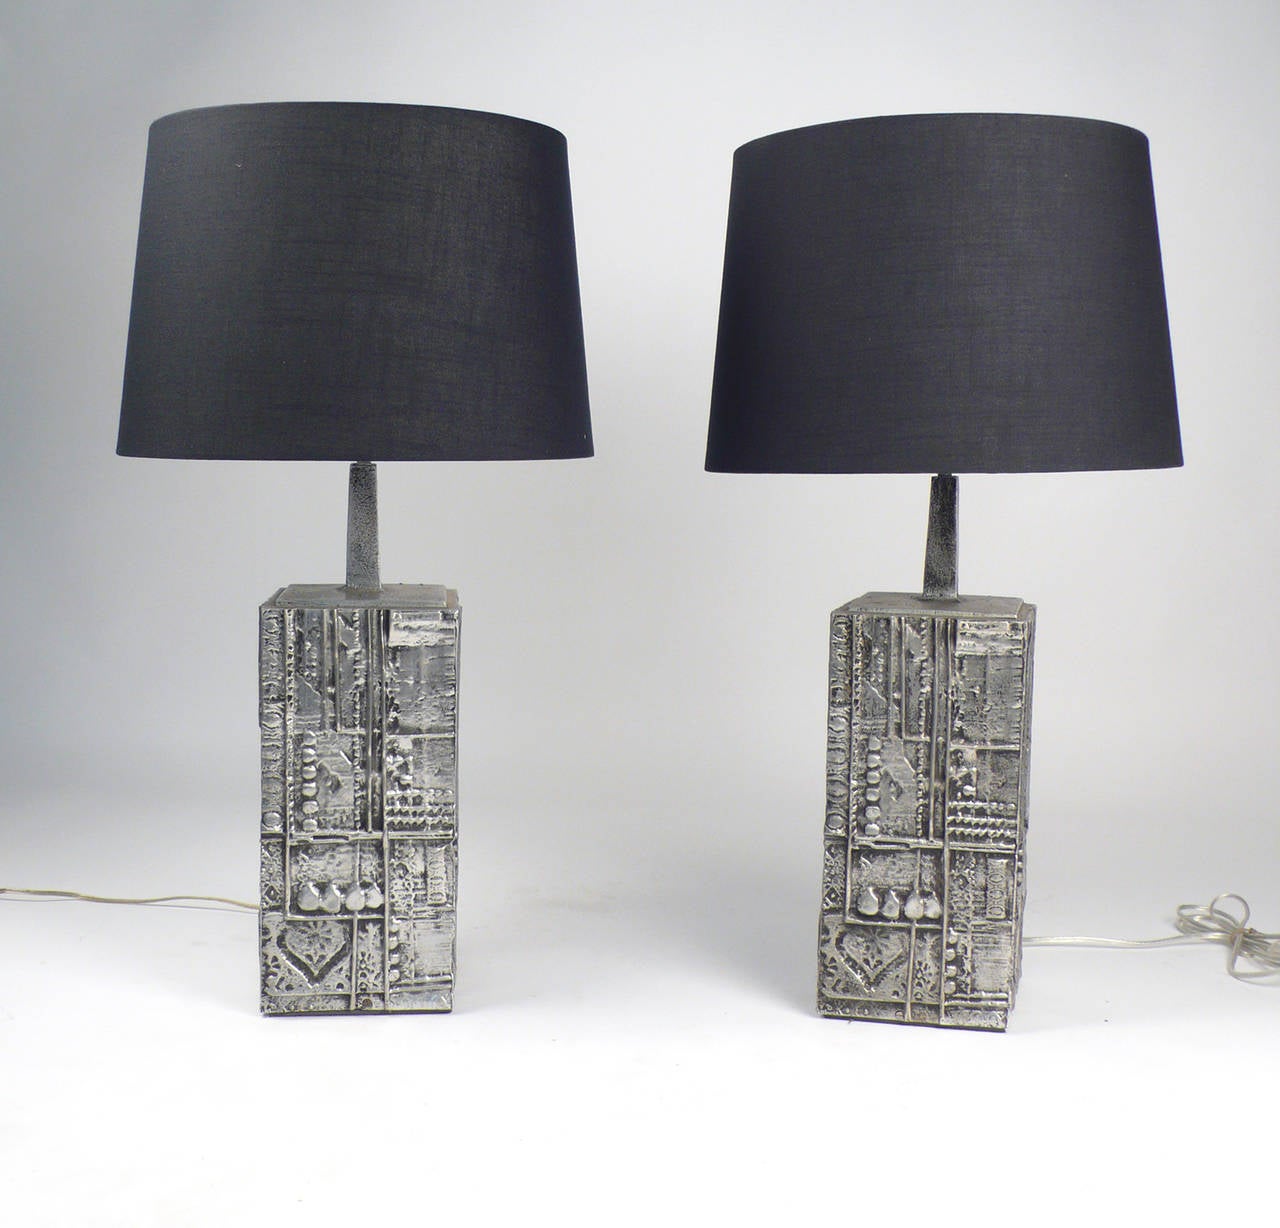 Table lamps designed by Donald Drumm.